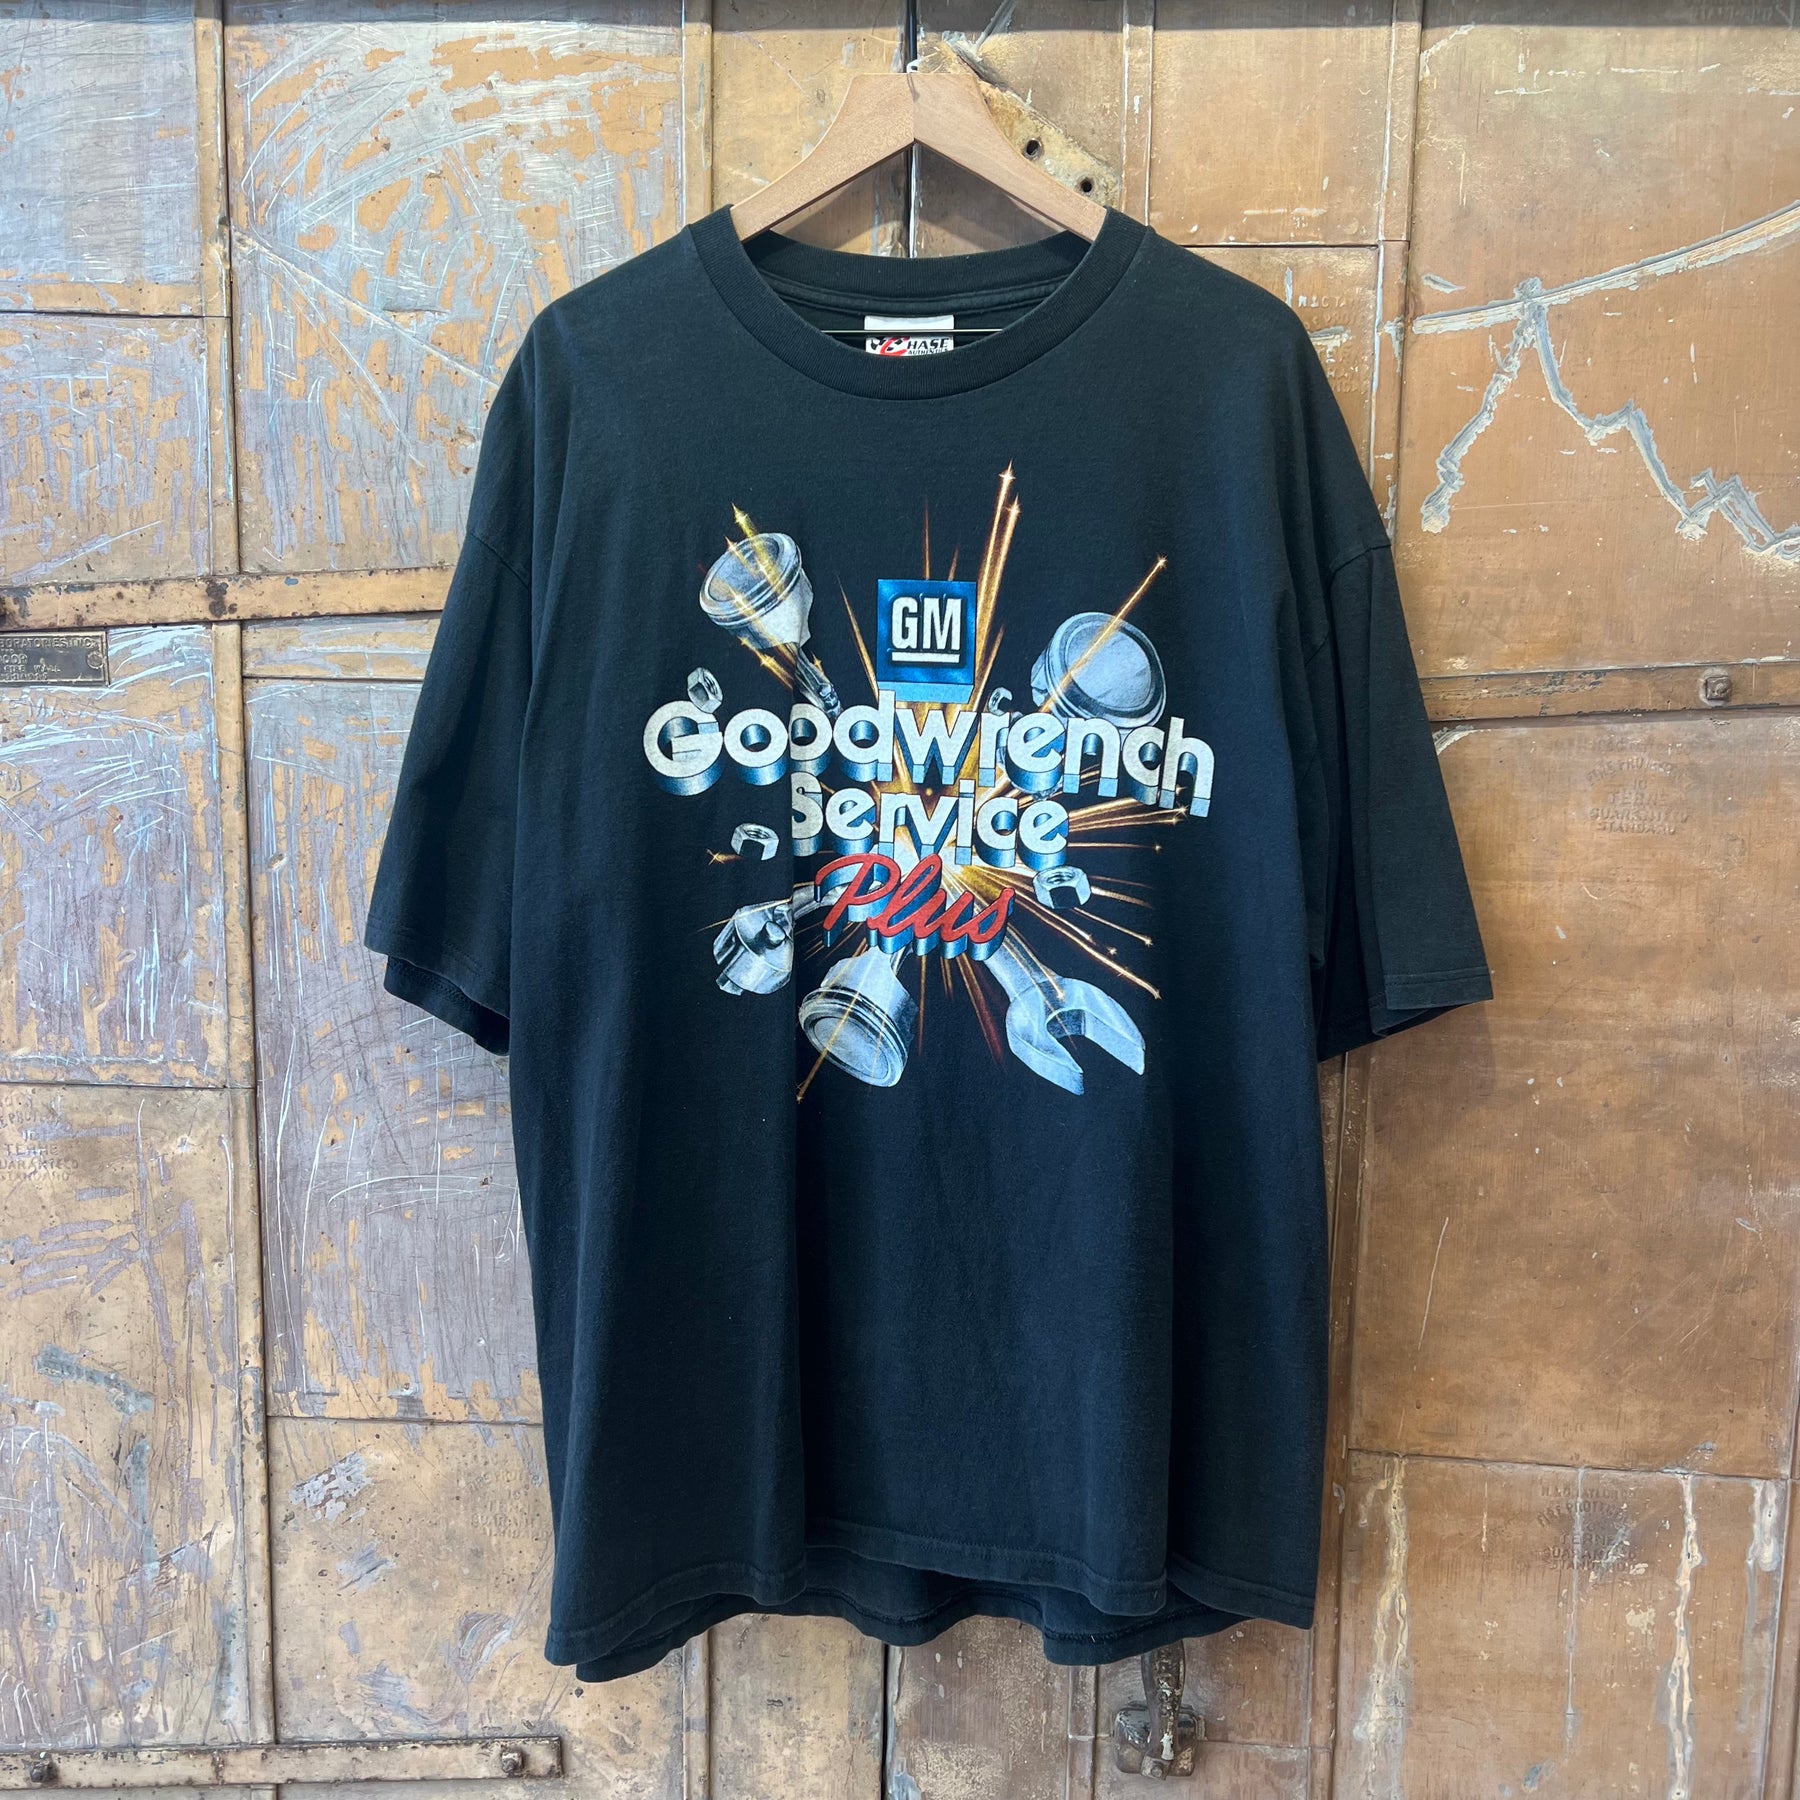 Goodwrench Service Plus Black Racer tee